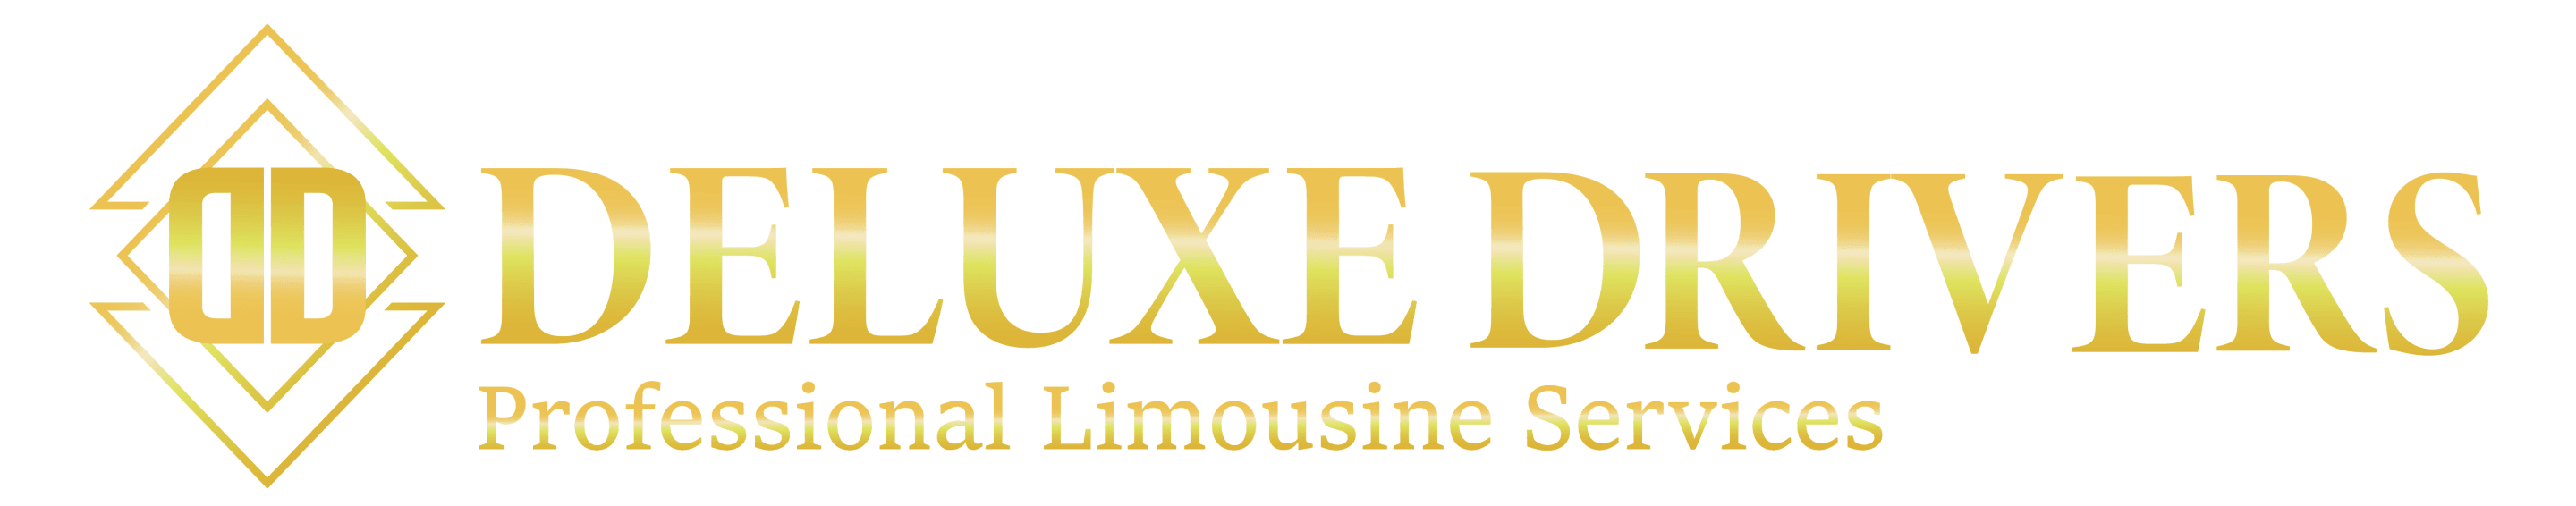 DELUXE DRIVERS - Professional Limousines Services